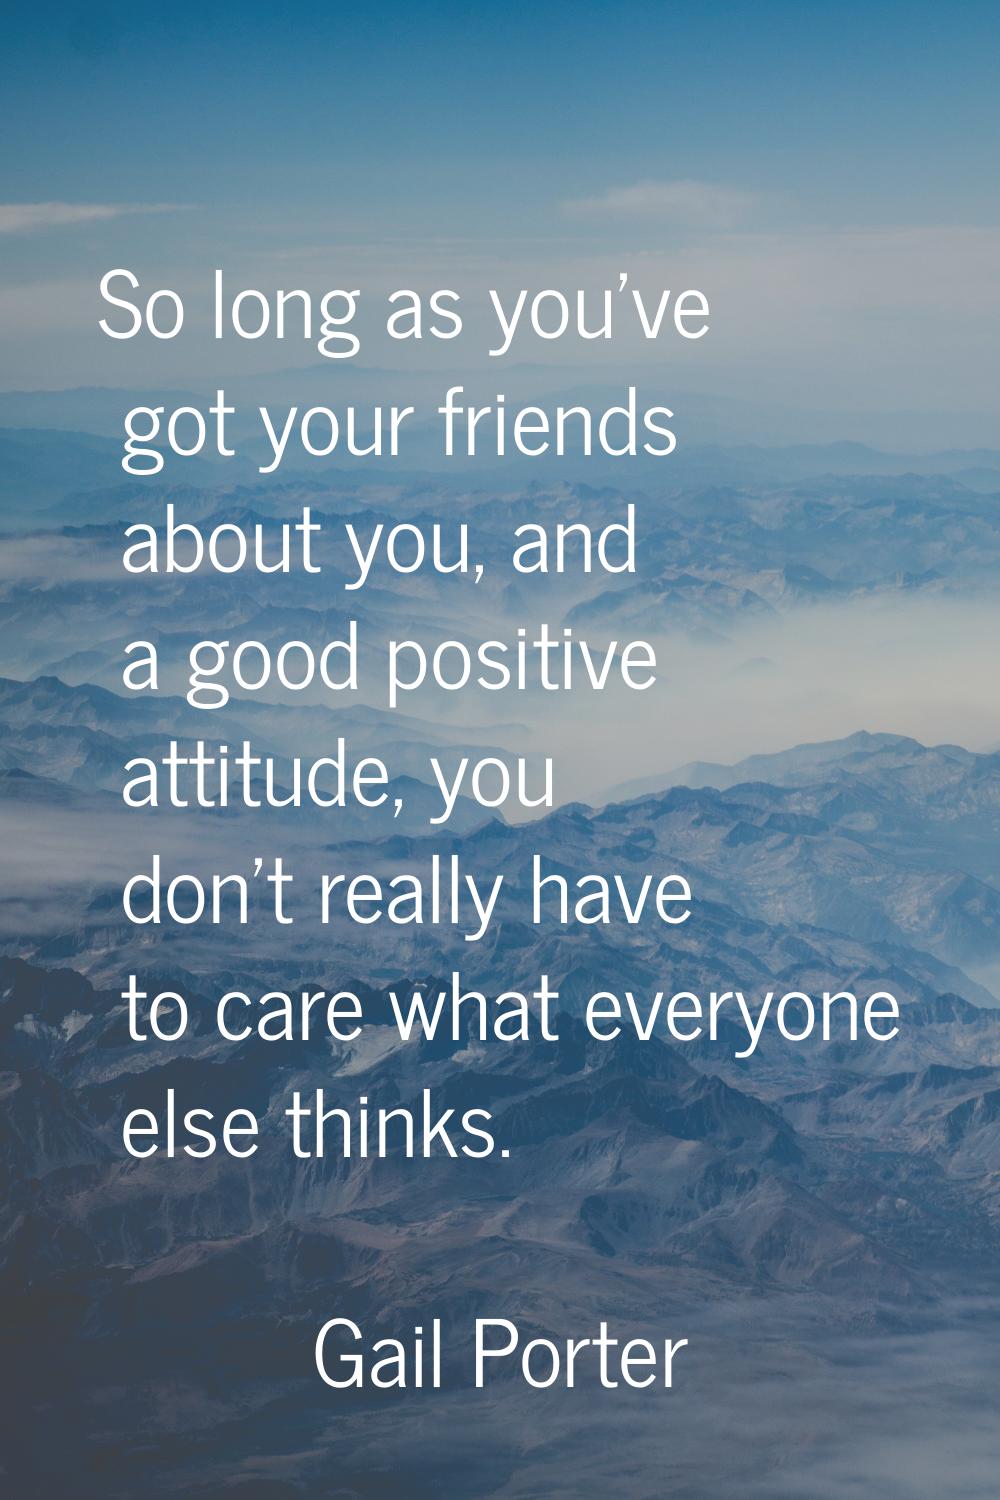 So long as you've got your friends about you, and a good positive attitude, you don't really have t